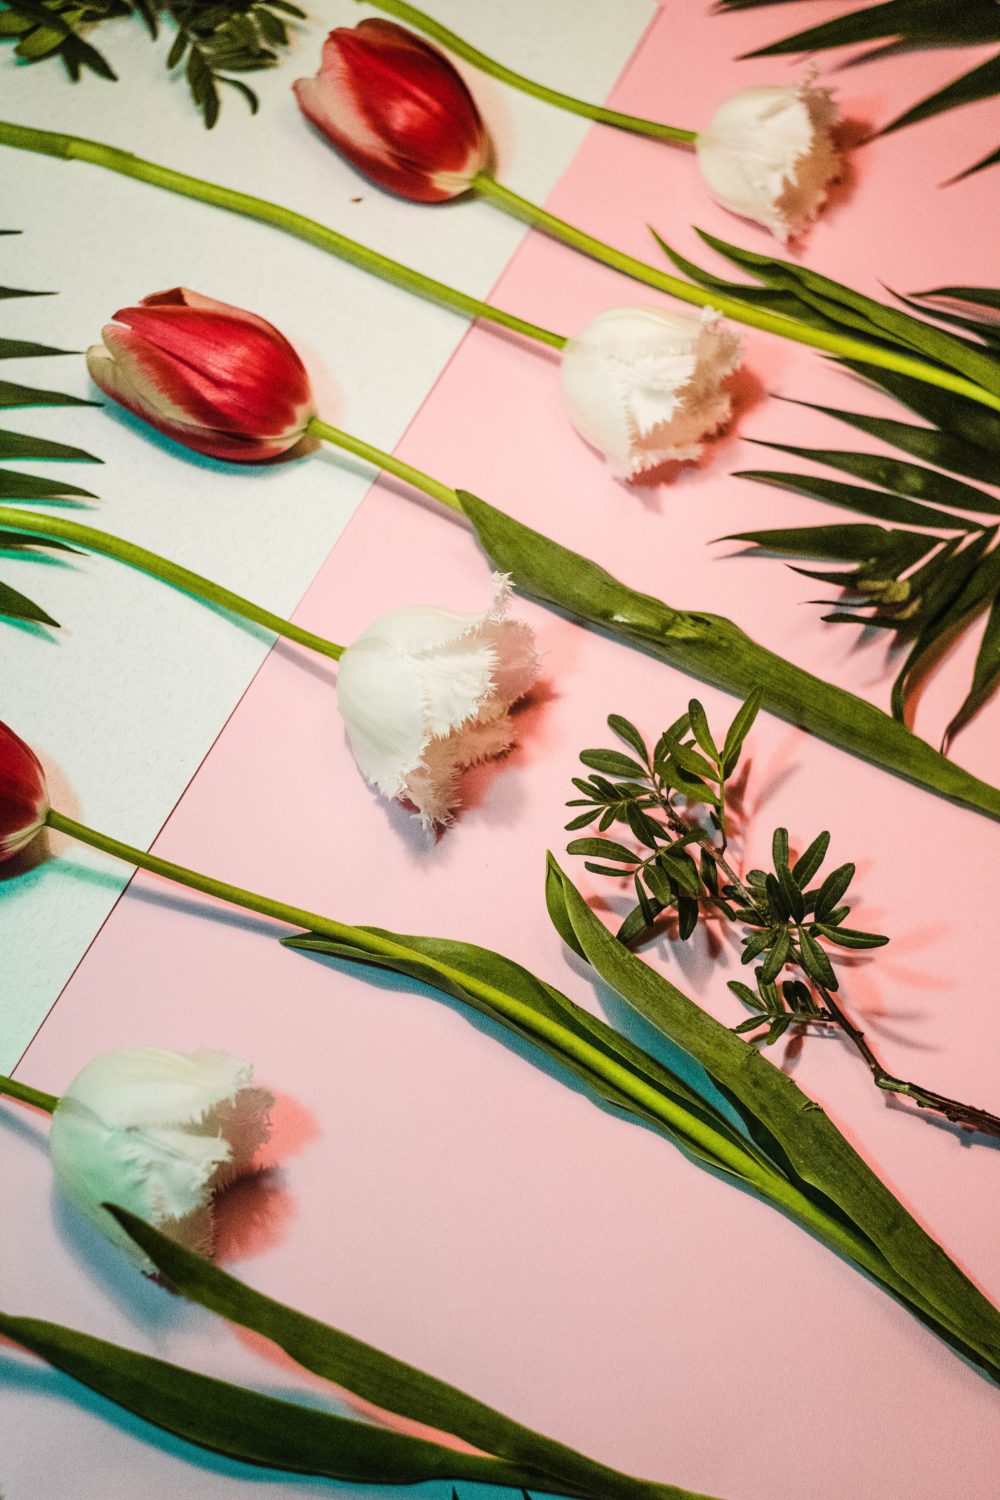 Why Creating A Spring Fertility Altar Is So Inspiring (And We Don’t Mean Babies)